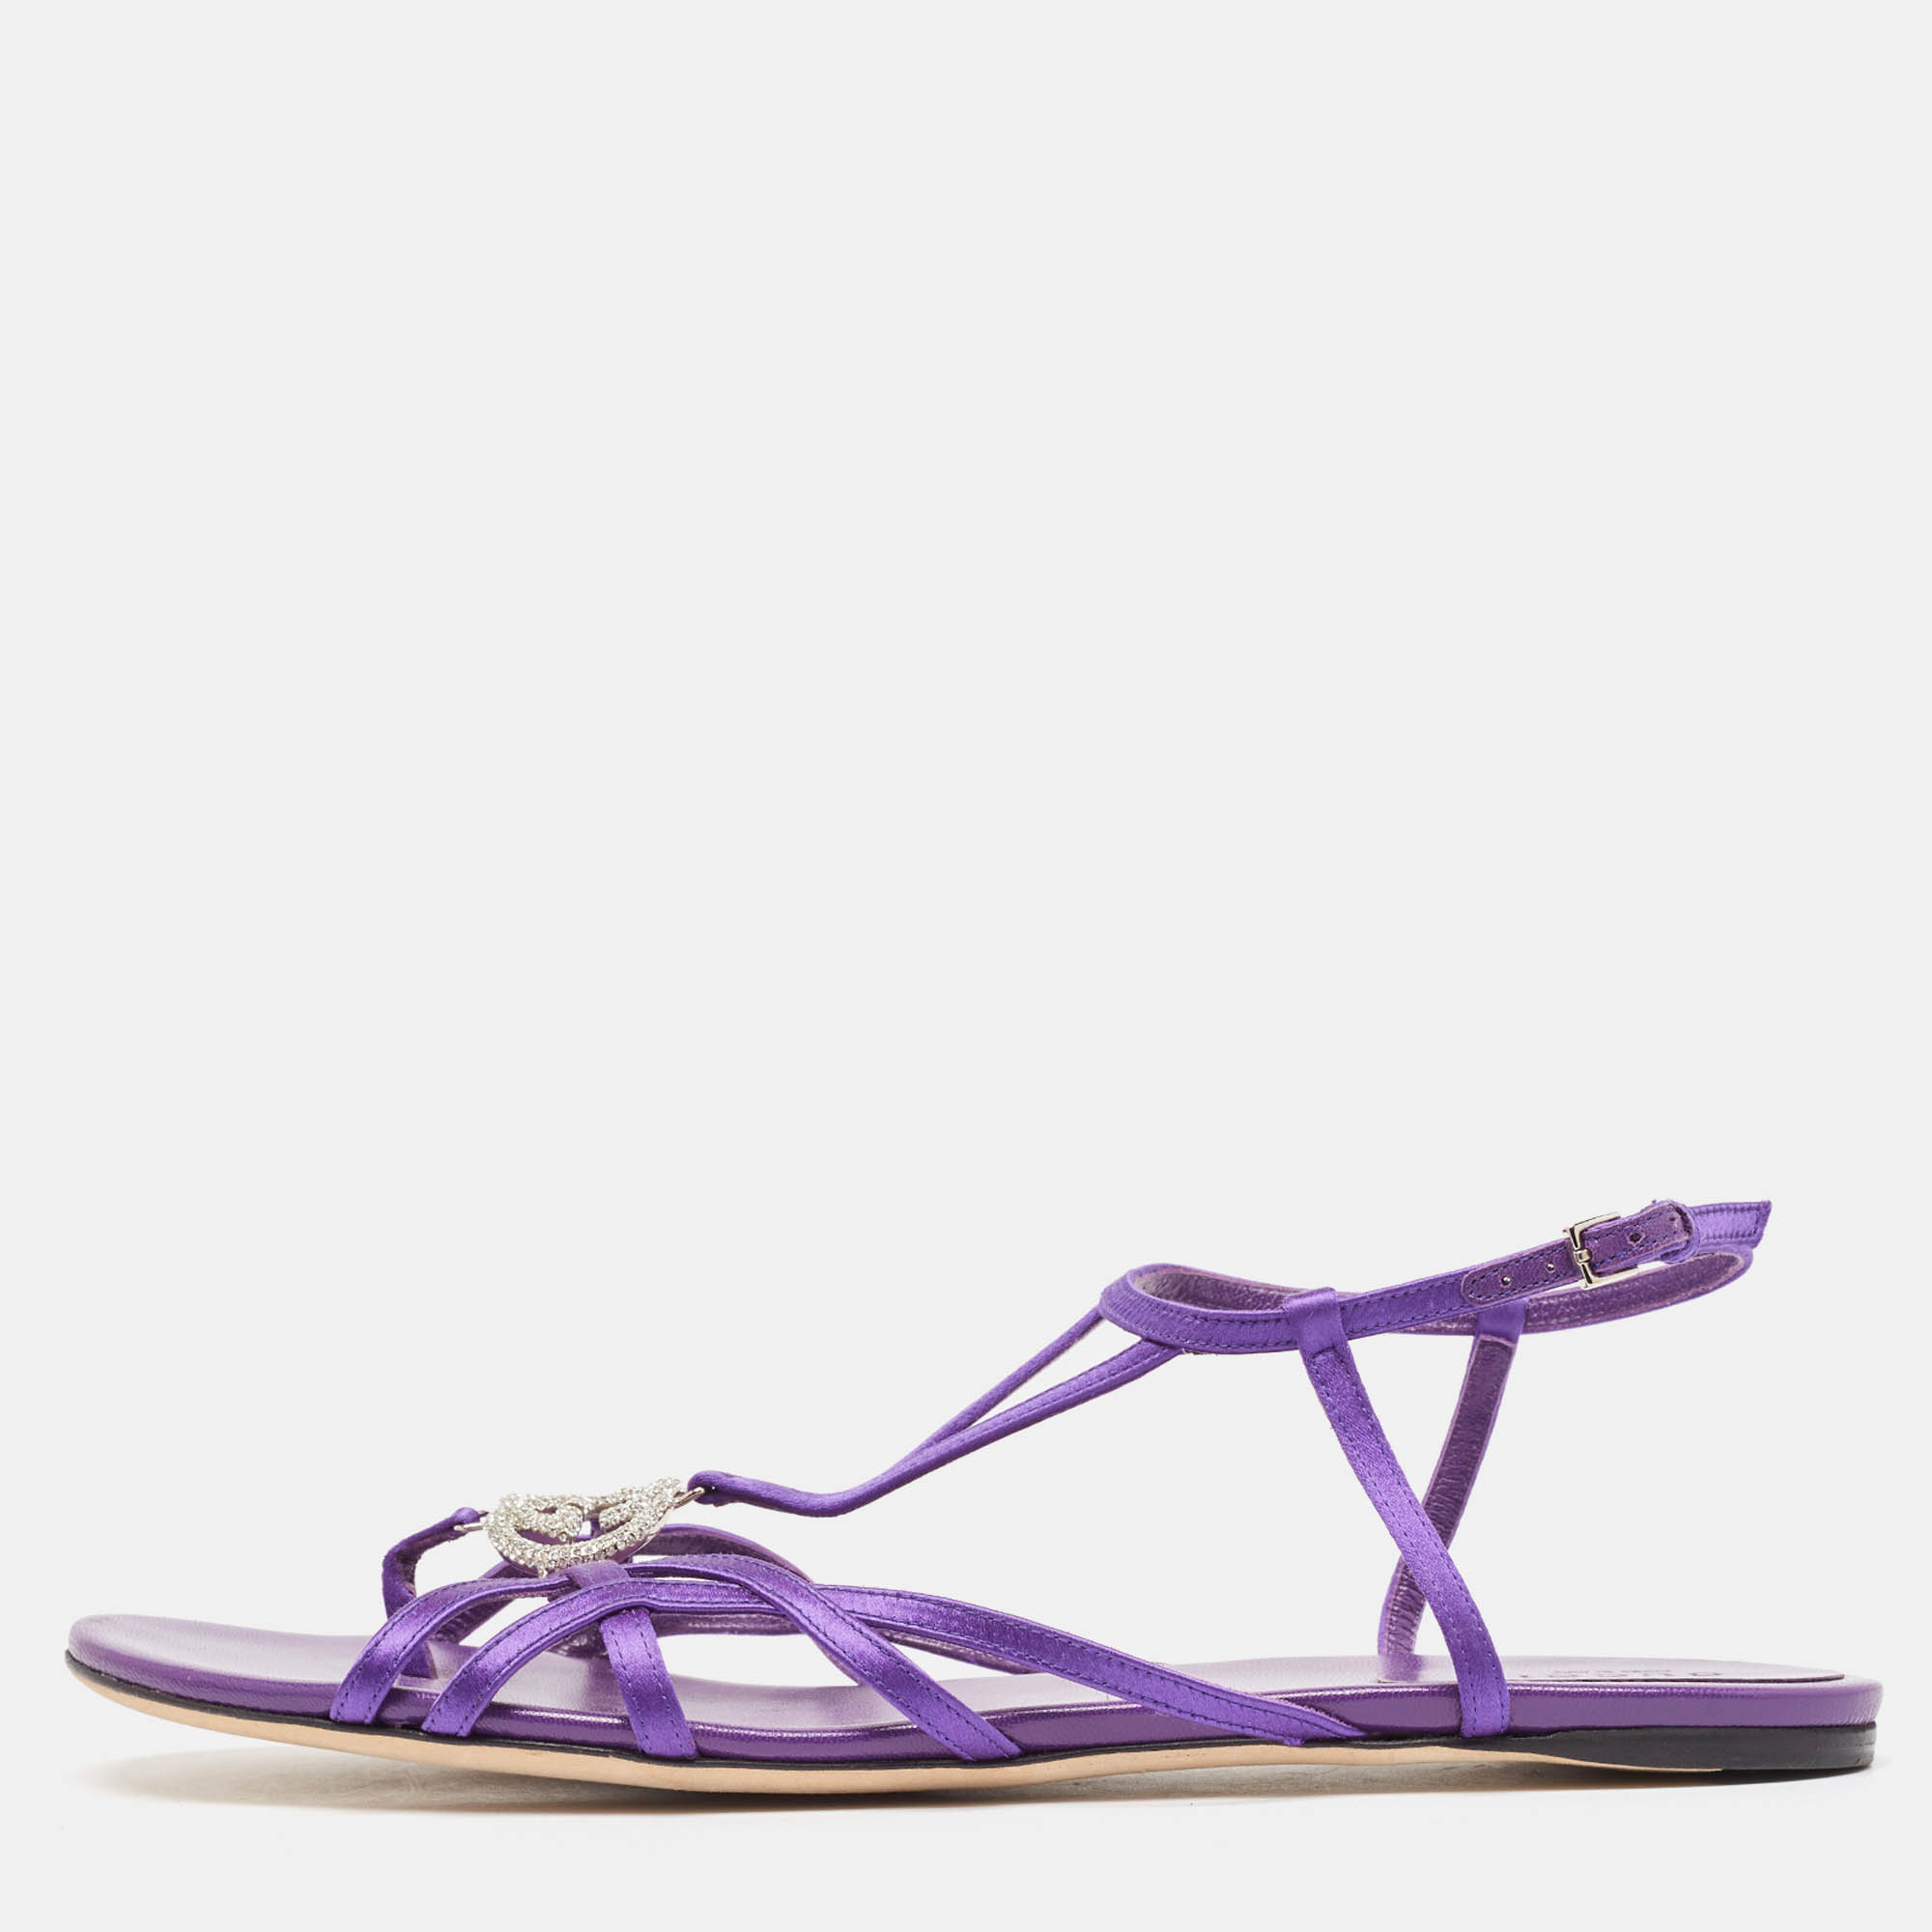 Gucci purple satin crystal embellished thong ankle strap flat sandals size 40.5